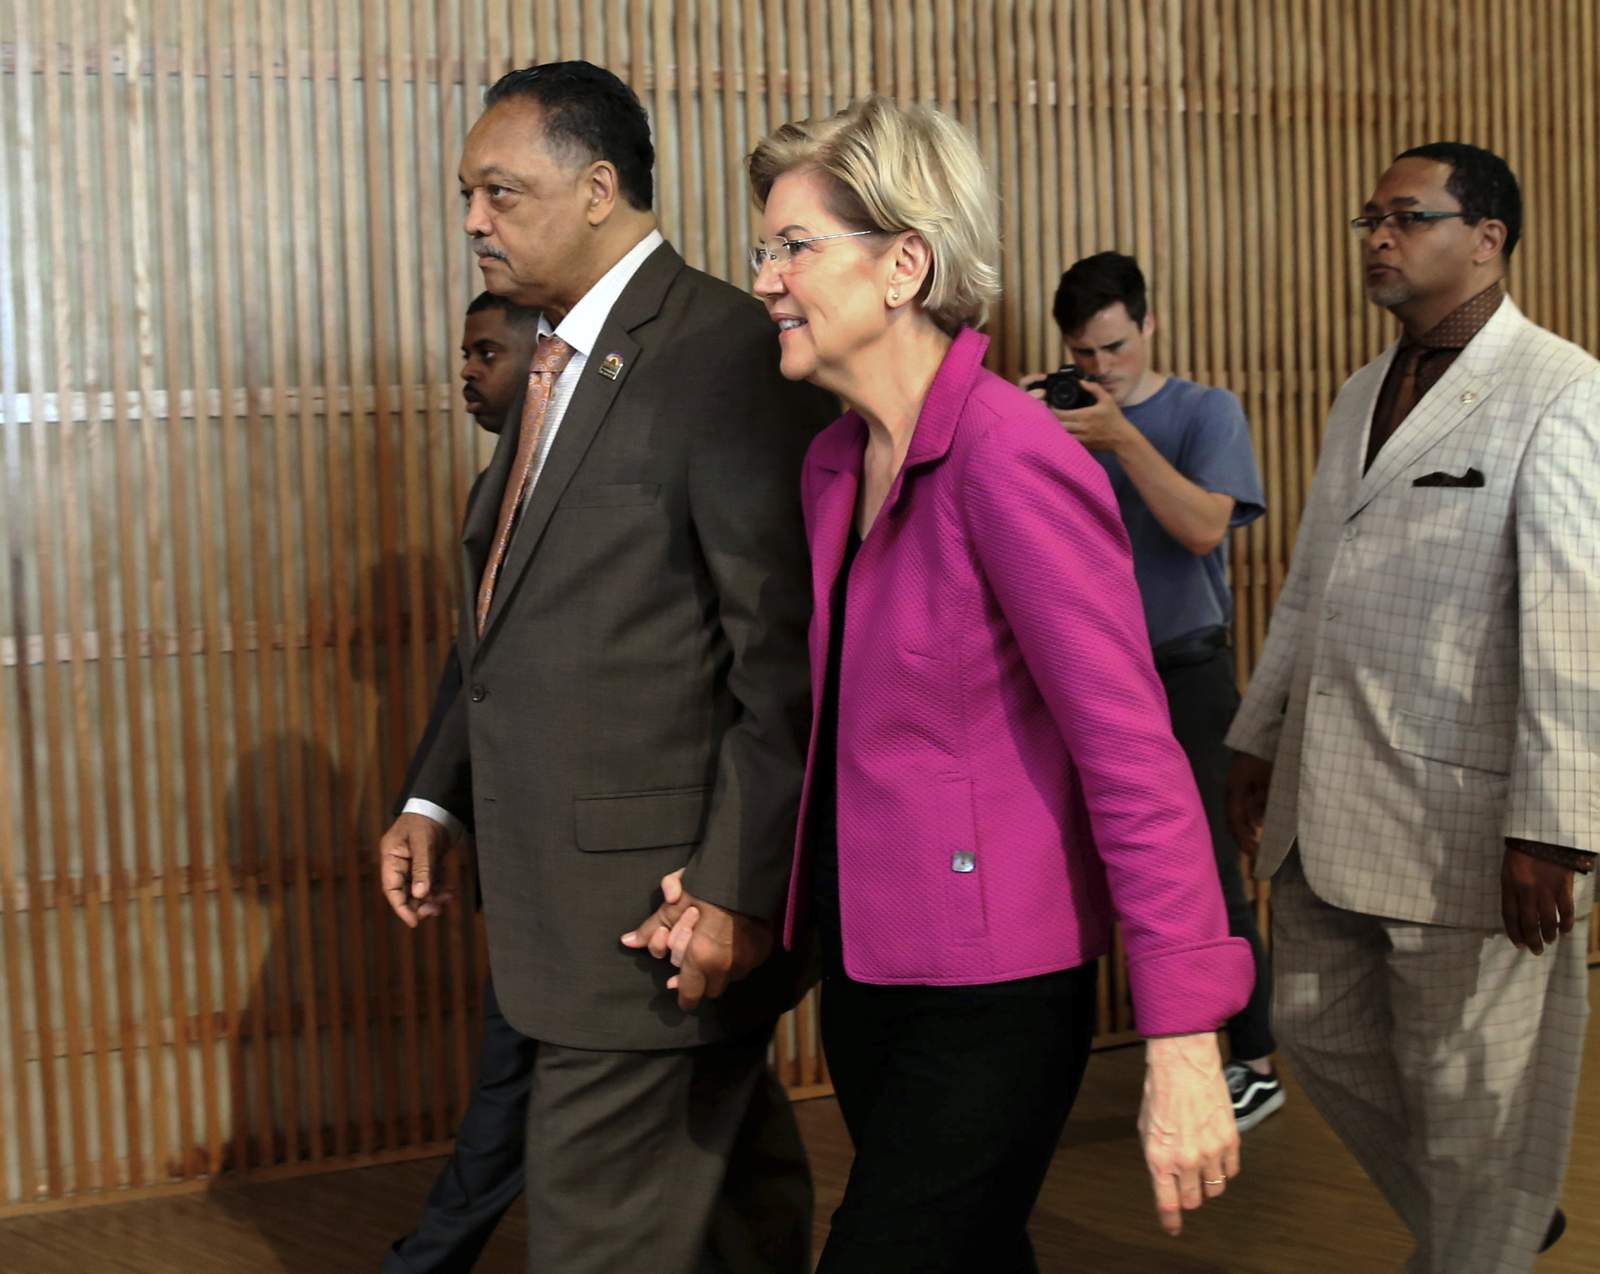 Warren's outreach to black voters could help VP standing